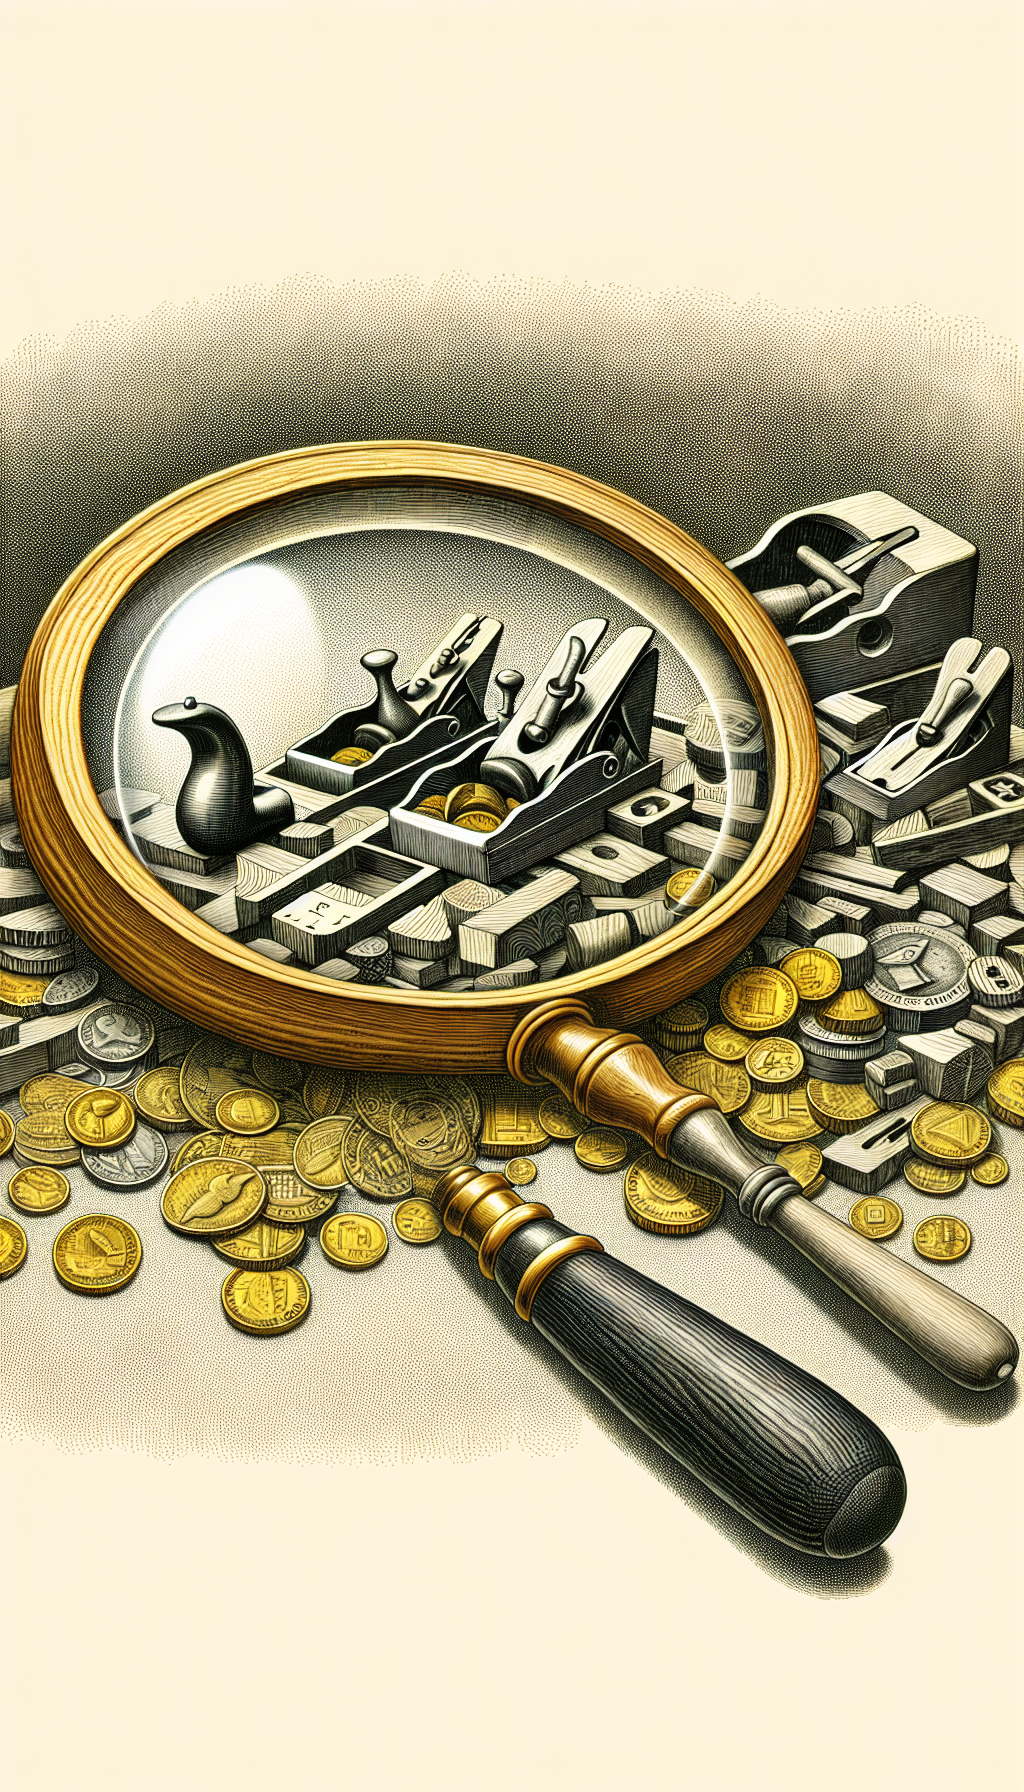 An illustration depicts a magnifying glass hovering over a collection of antique wood planes, each branded with distinct maker's marks. Beneath the lens, the planes seem to transform into piles of coins and bills, signifying their value. The magnifying glass signifies scrutiny and impact, while the currency blend hints at the valuation, rendered in an engraved vintage style.